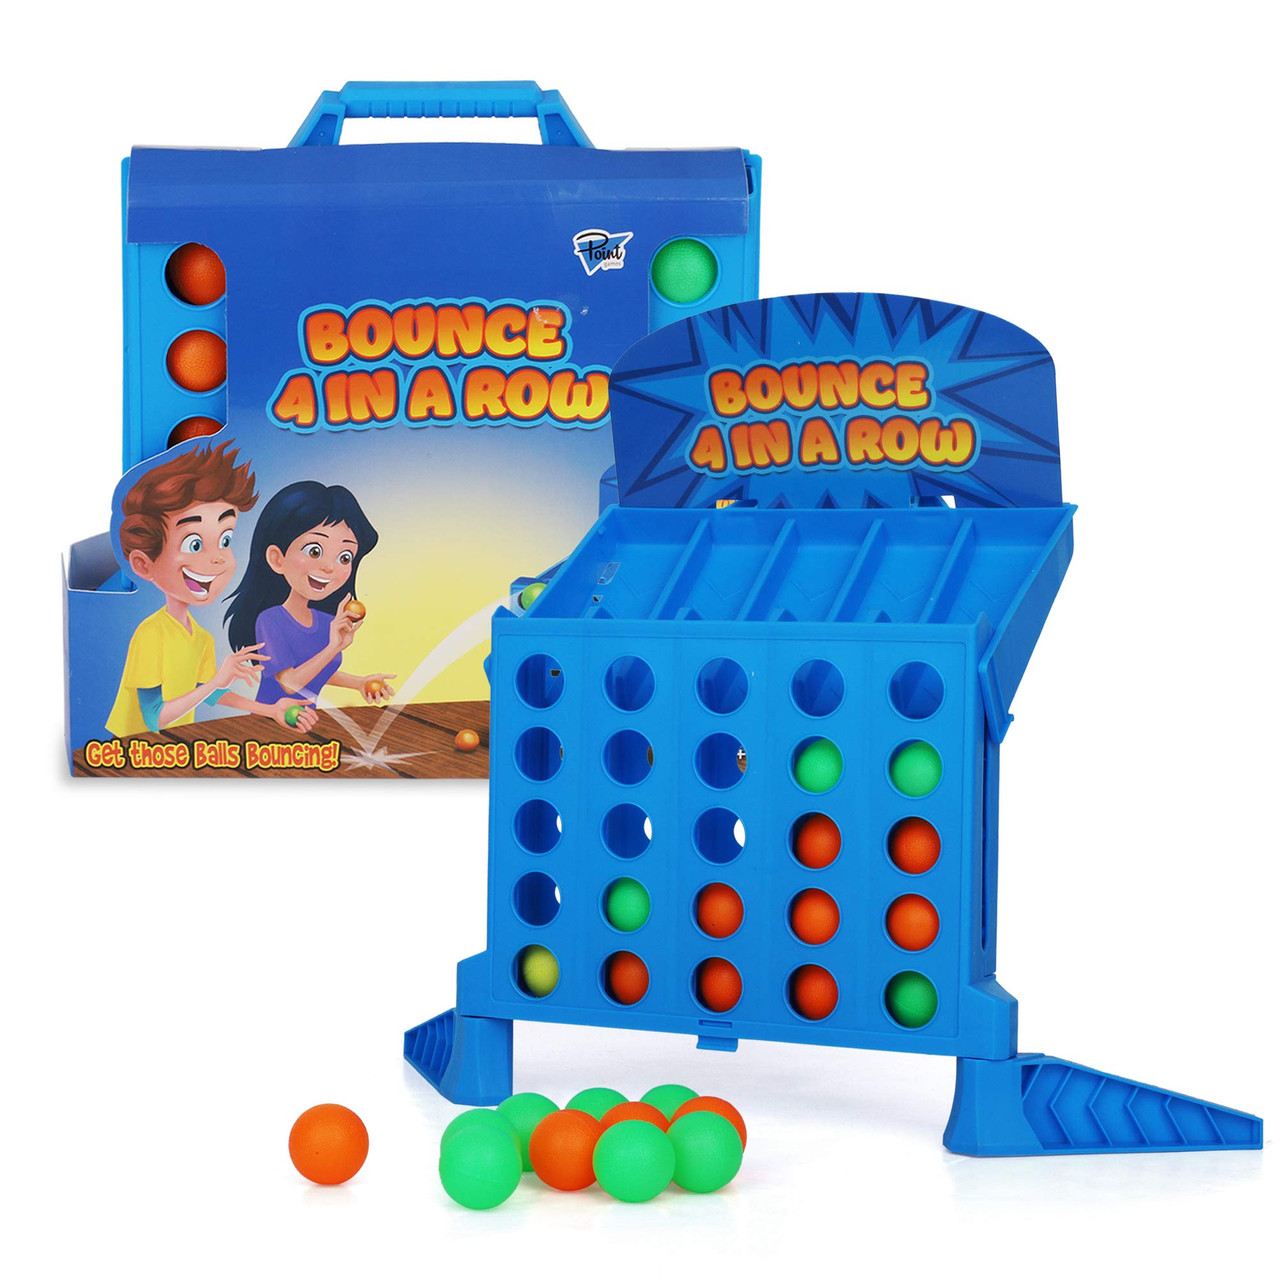 Point Games Bounce 4 in a Row - Travel Friendly Storage Case- Classic Board  Games w Twist 